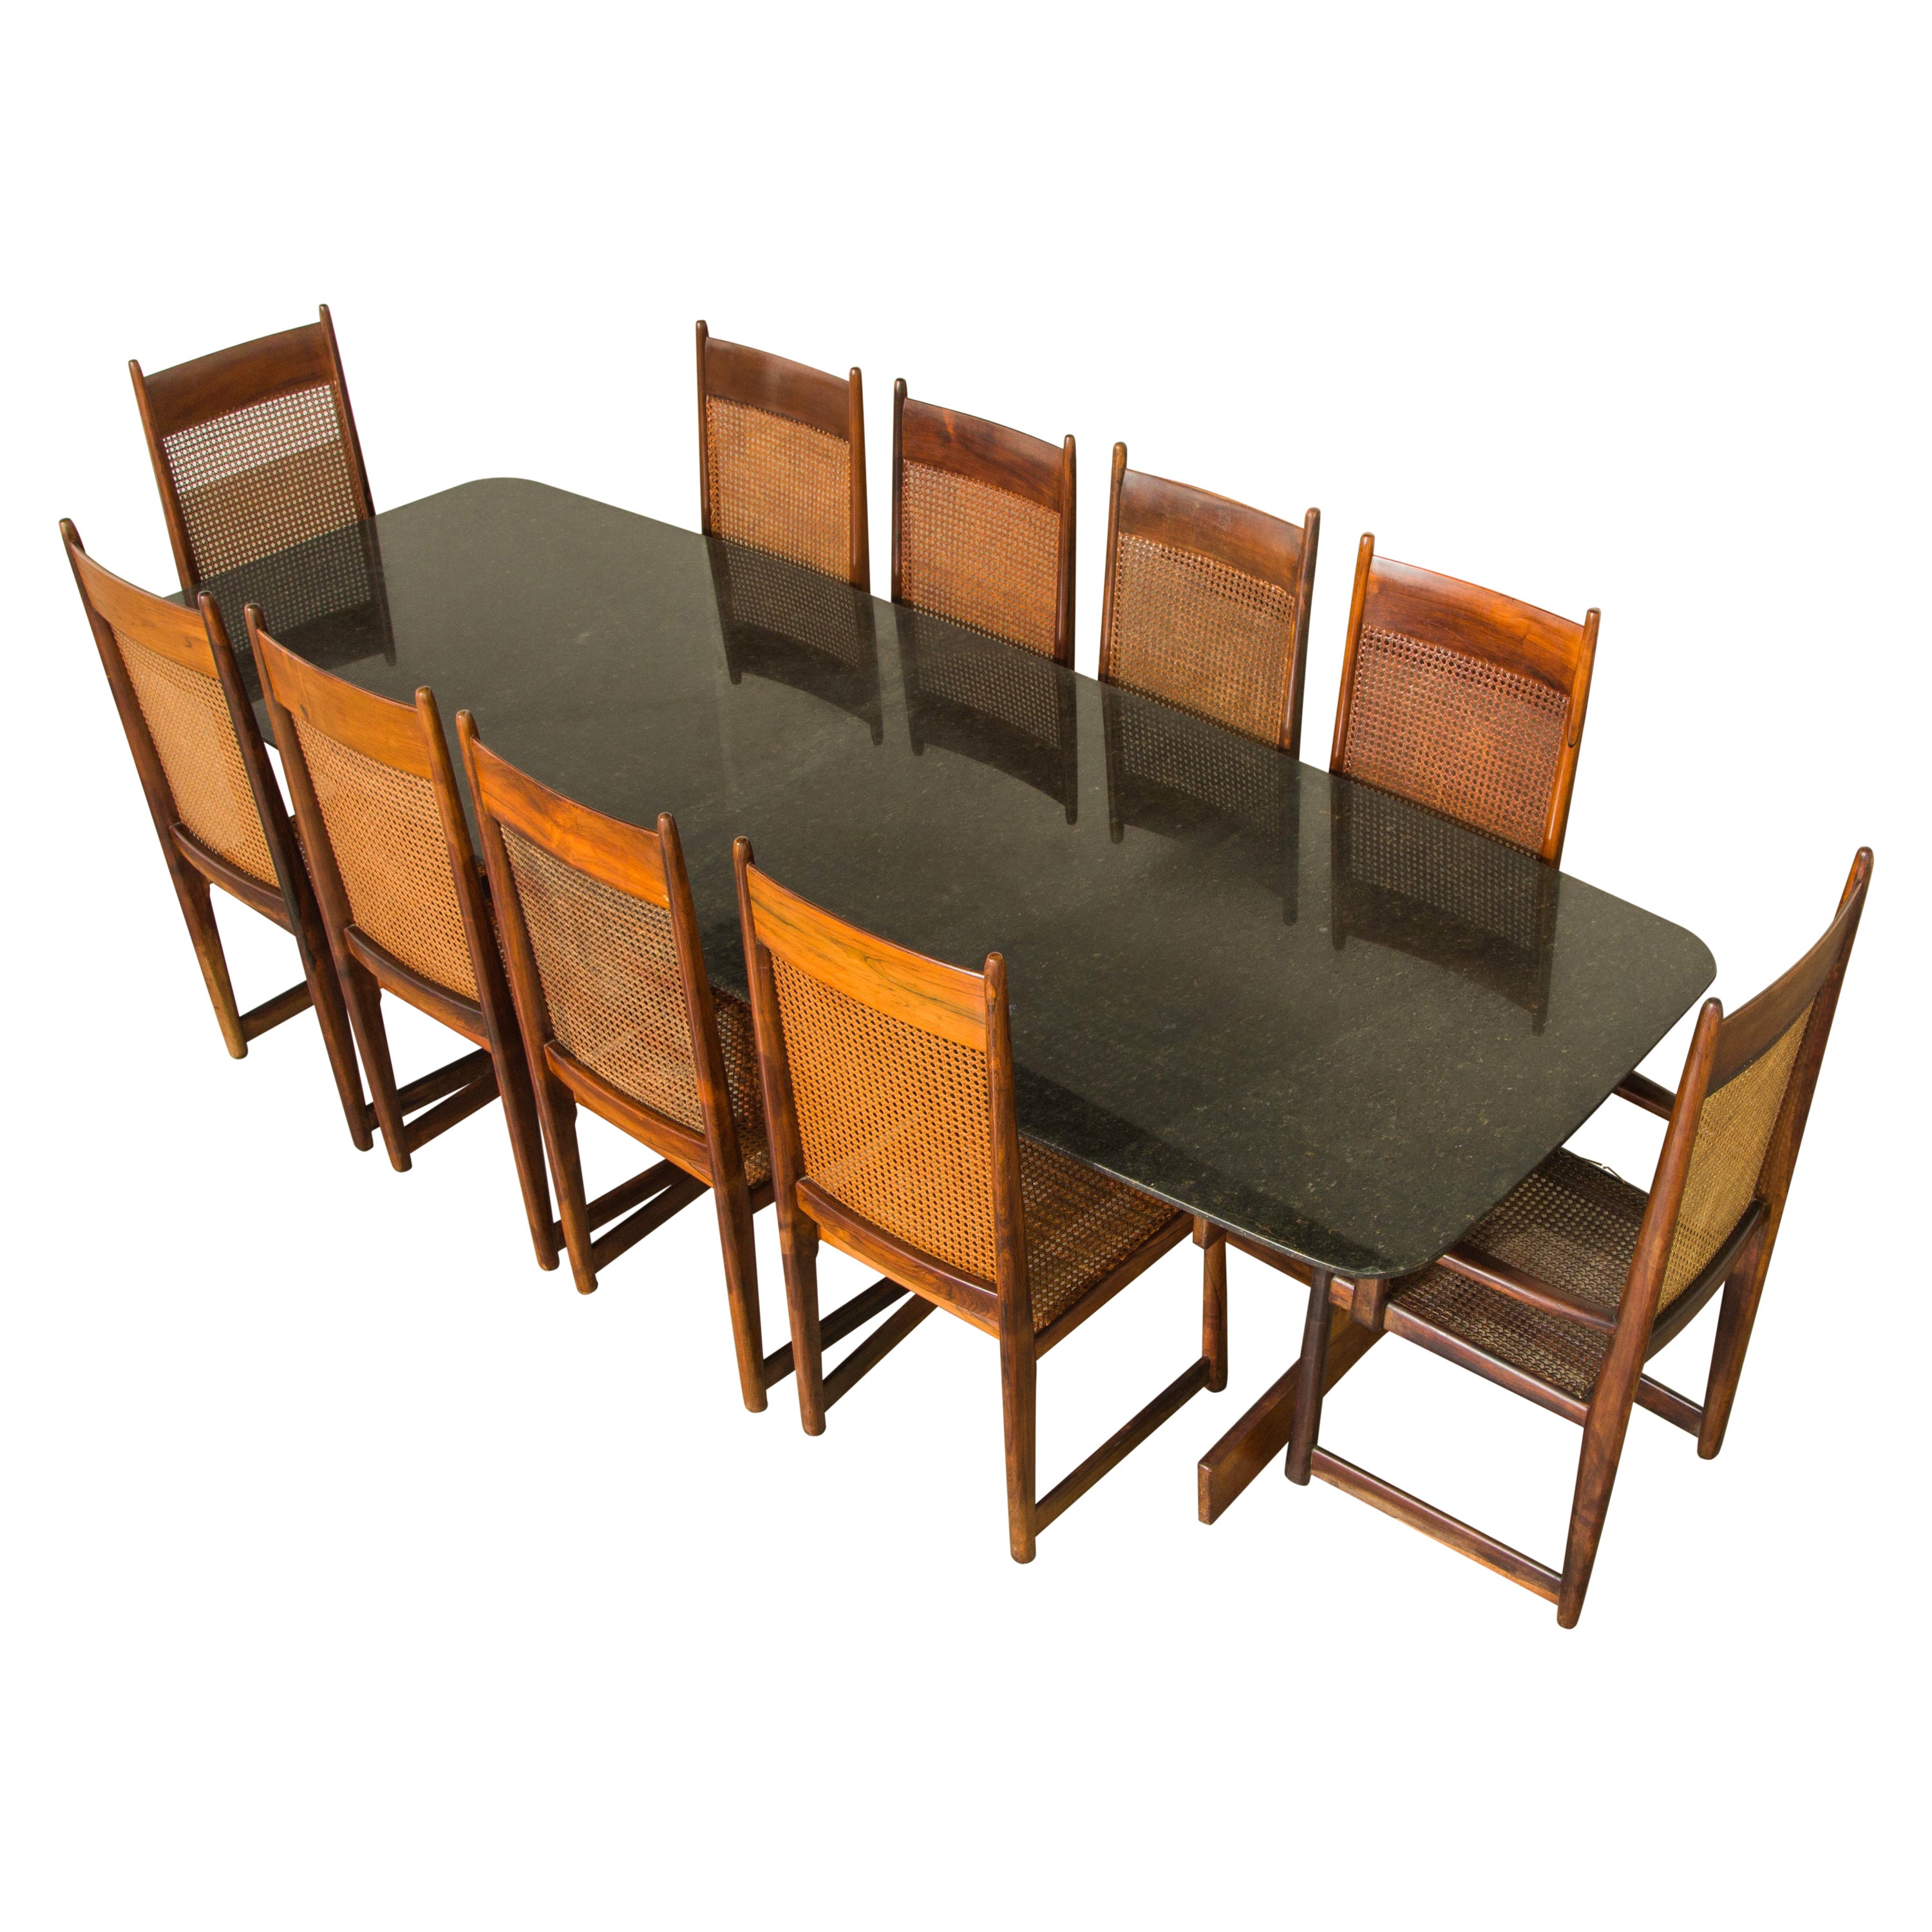 Sergio Rodrigues Jacaranda & Granite Dining Table with Ten Dining Chairs, 1960s